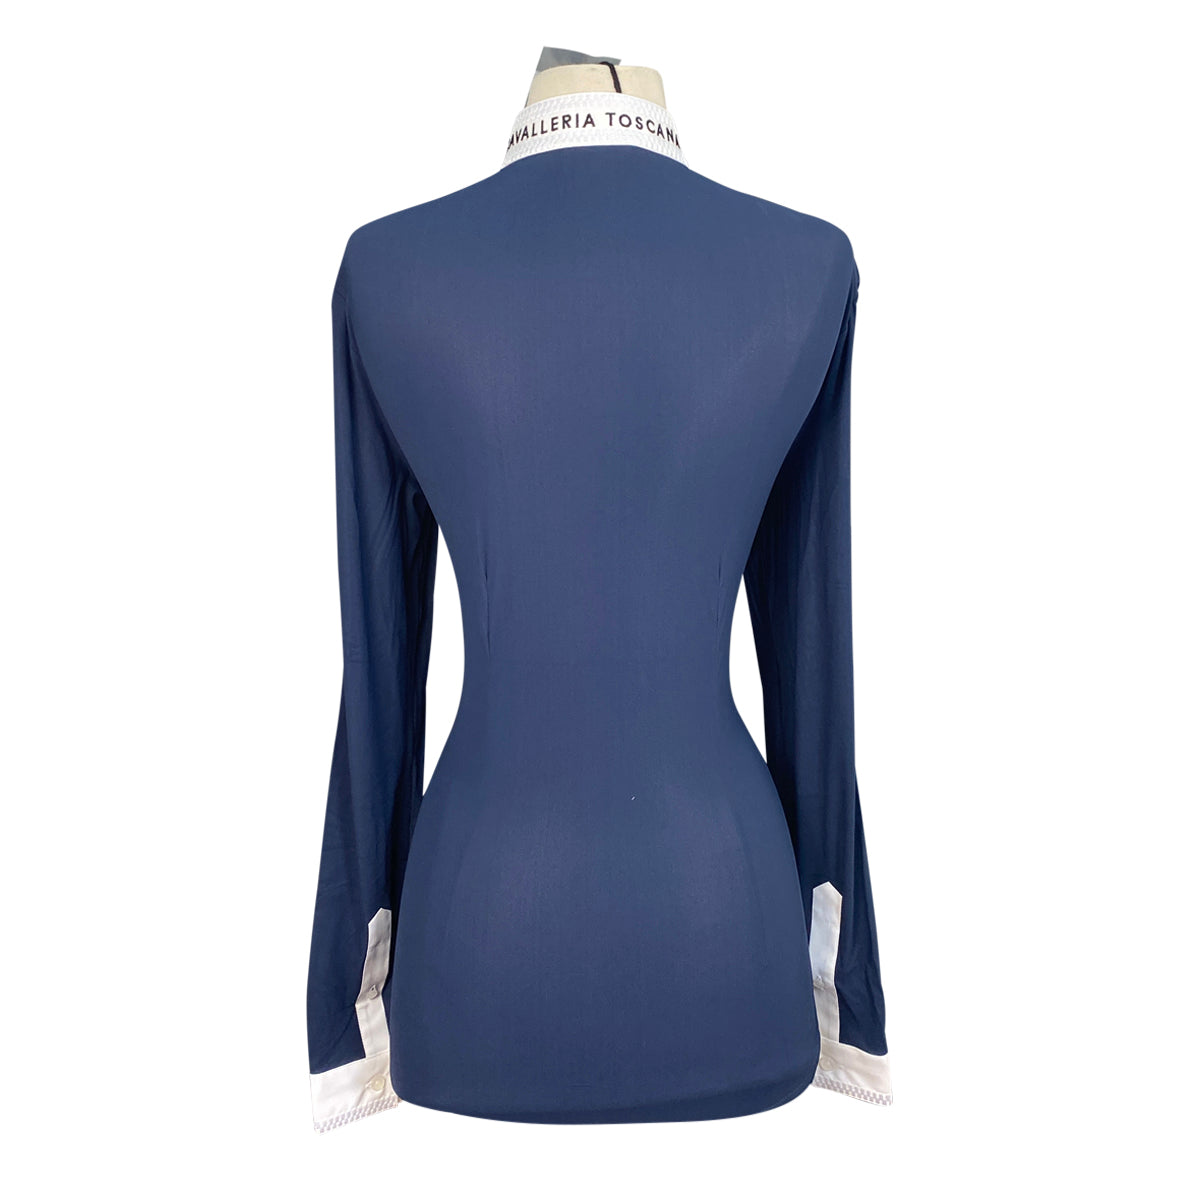 Cavalleria Toscana L/S Jersey 'Elegant Embroidery' Competition Shirt  in Ocean Blue